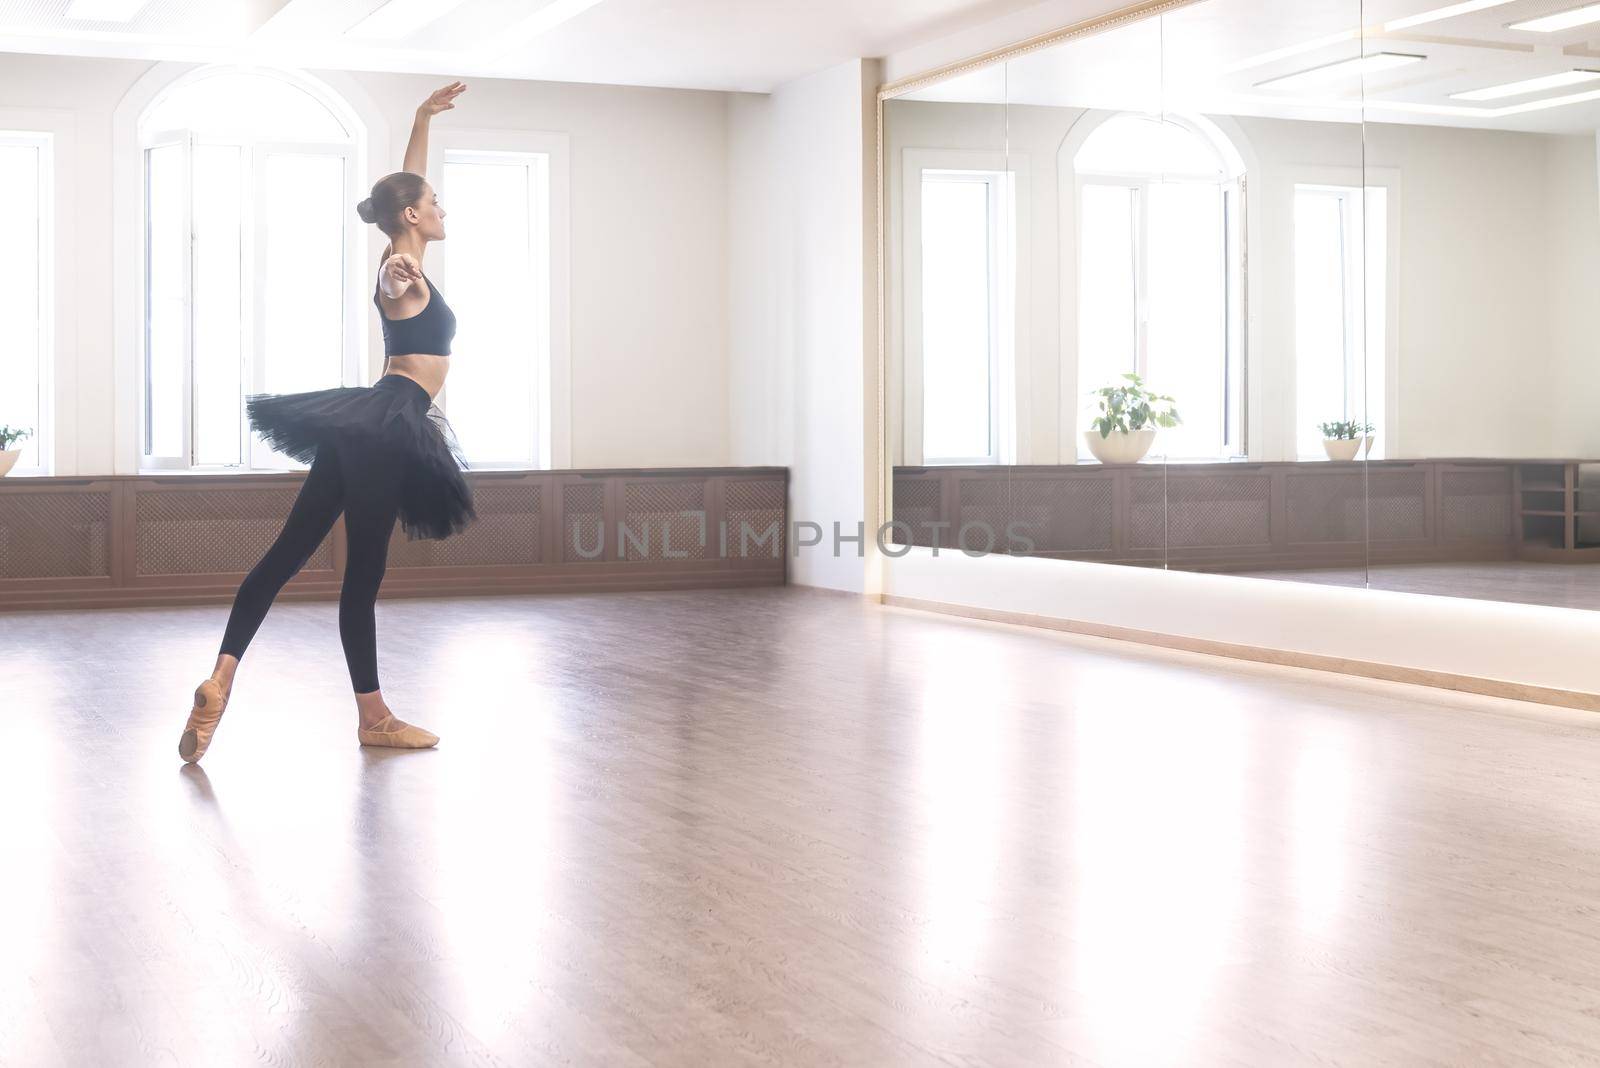 A graceful ballerina in a black tutu performs ballet exercises in front of a mirror in the studio by Nickstock